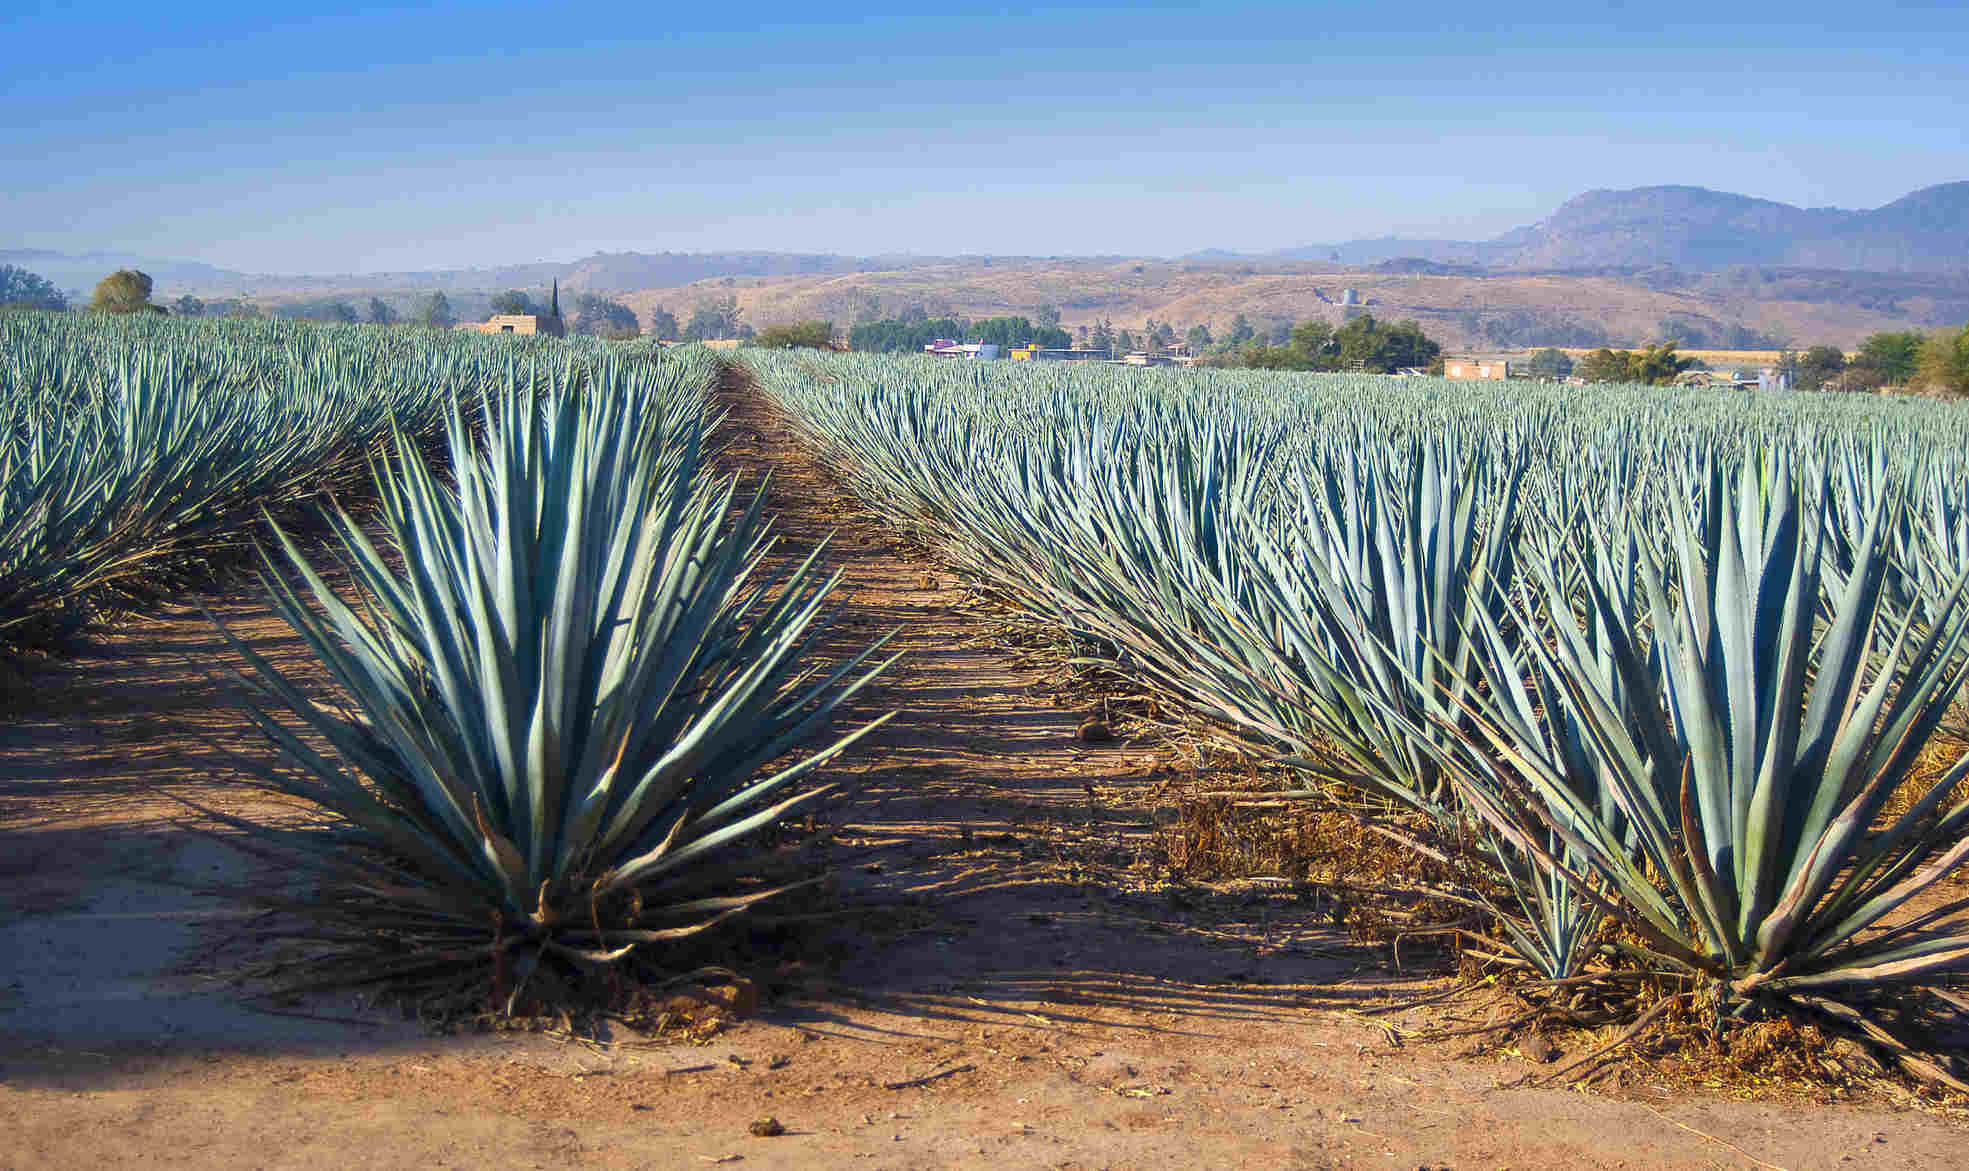 Consumers are beginning to get the category, showing a preference for those made with 100% Agave cactus plants rather than the more commonly-downed Tequilas made from mixed sugars.